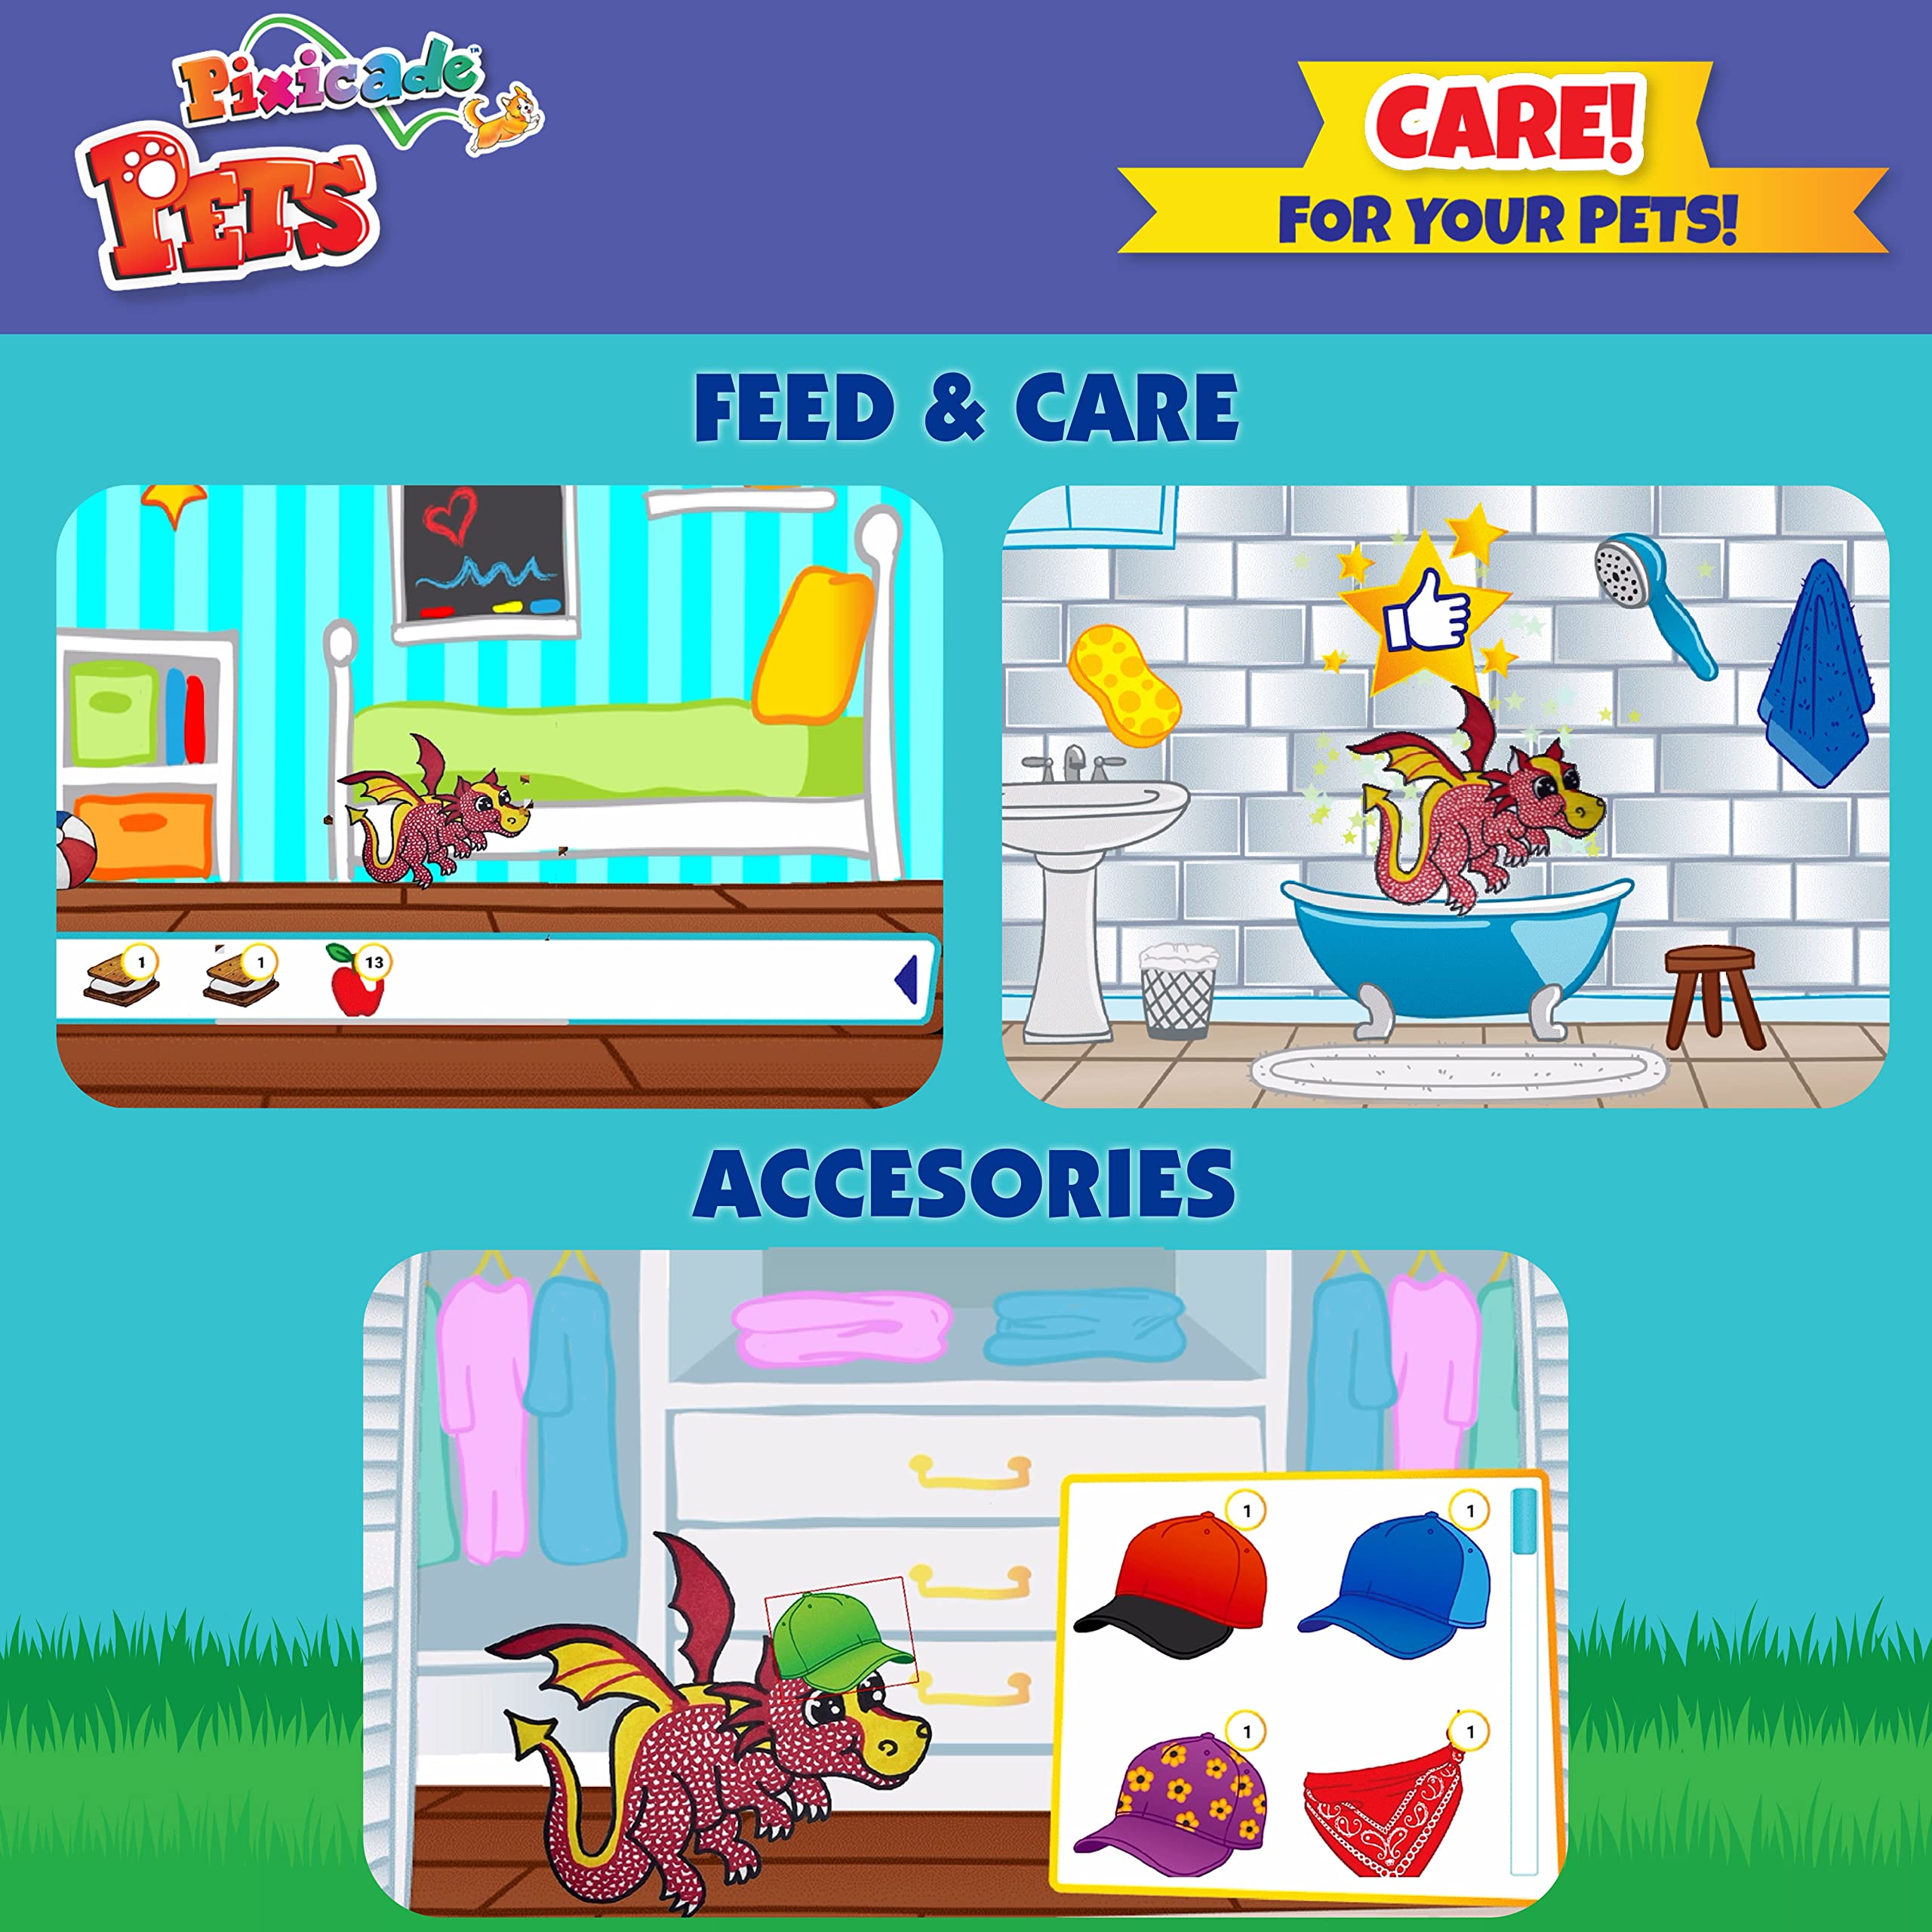 Pixicade Pets VIP: Draw Your Own Pets & Bring Them to Life On Your Mobile Device or Tablet- Create Your Own Virtual Pet Universe Bonus Amusement Park- STEM Toys for Ages 6+